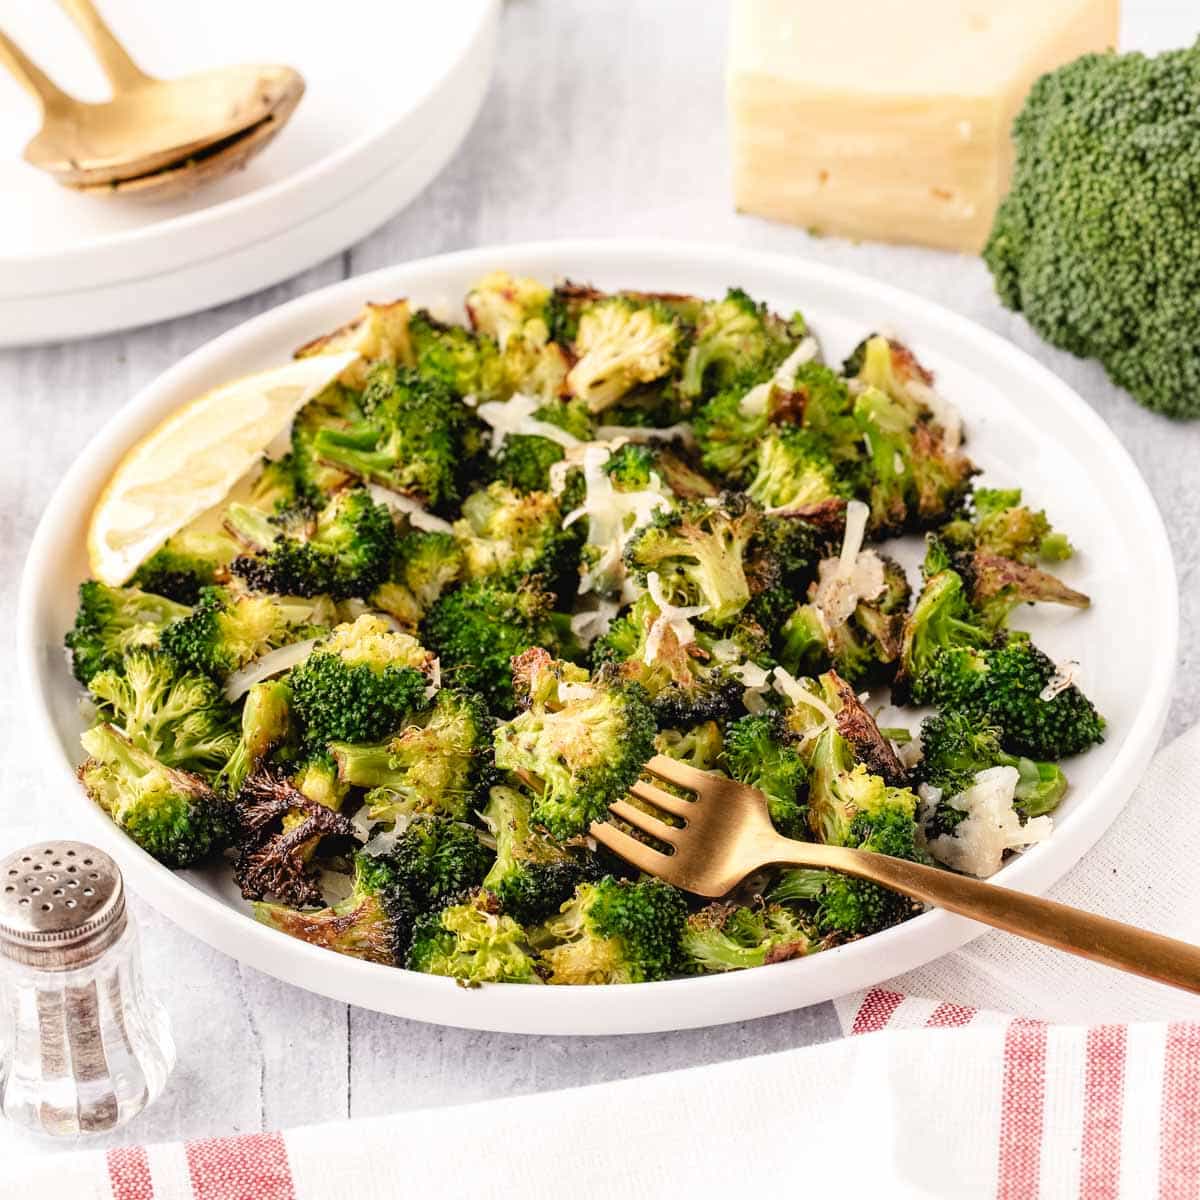 Oven-Roasted Broccoli Recipe with Parmesan